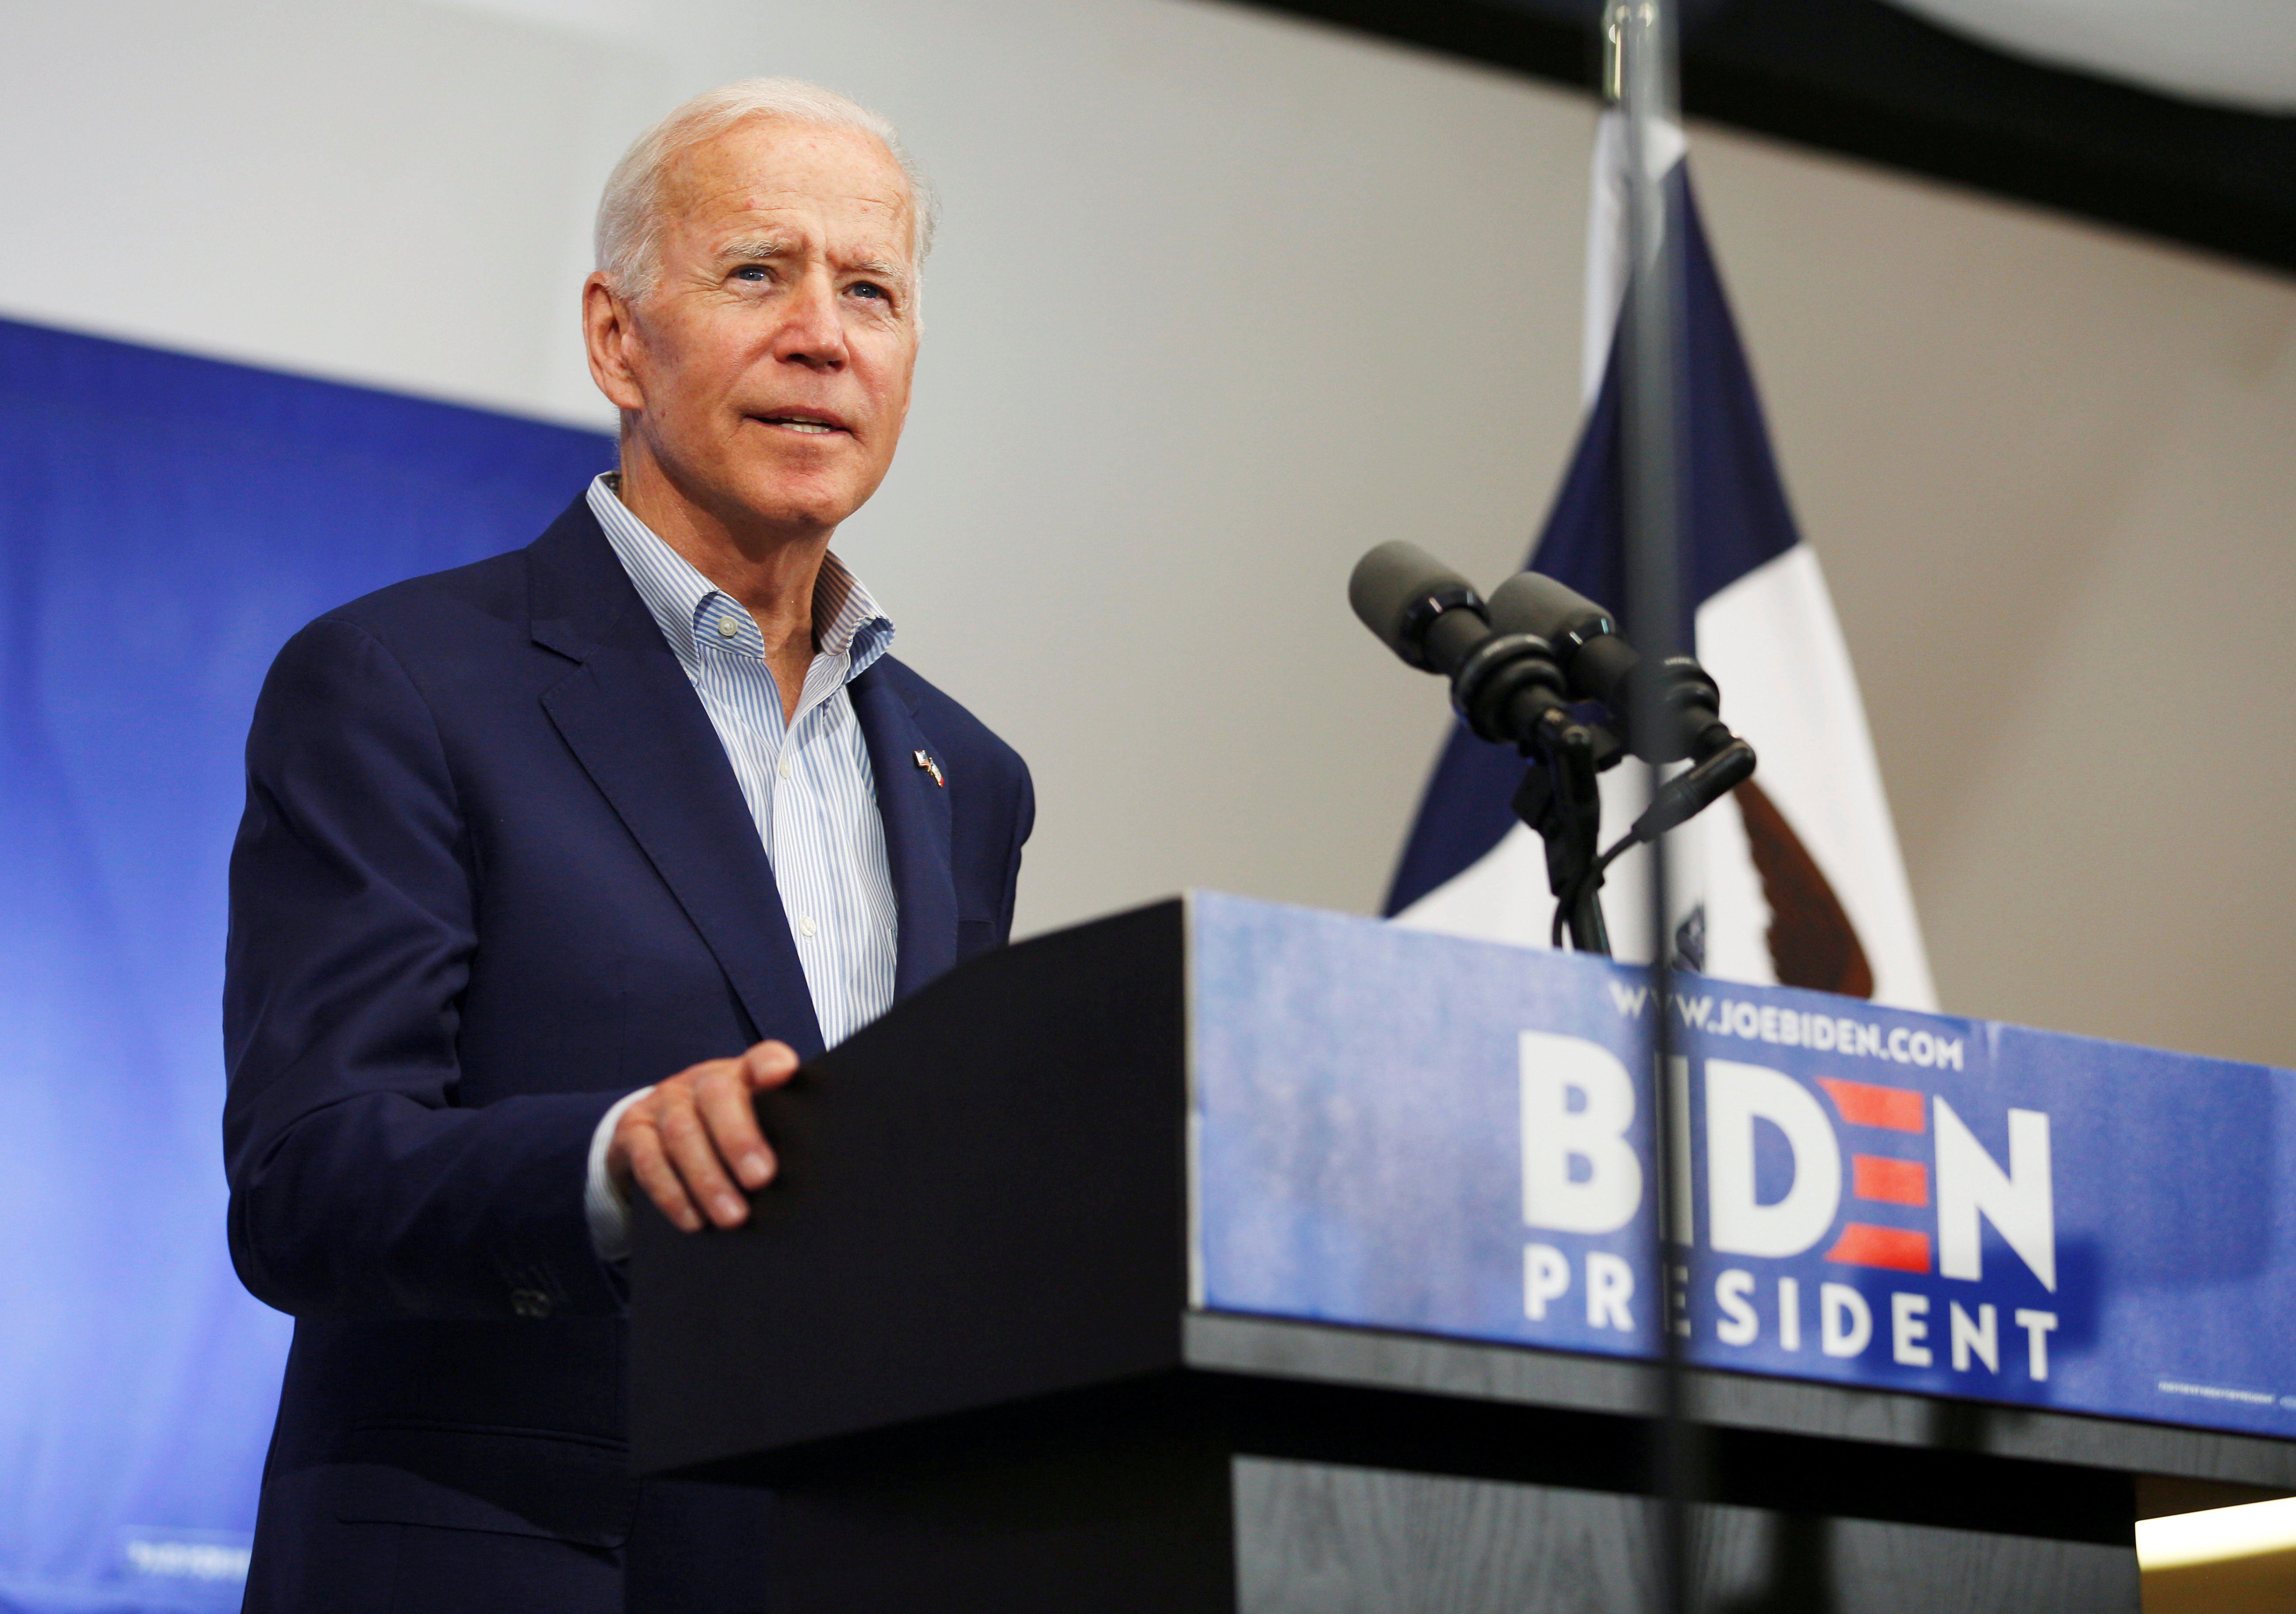 FILE PHOTO: Democratic 2020 U.S. presidential candidate and former Vice President Joe Biden speaks at an event at the Mississippi Valley Fairgrounds in Davenport, Iowa, U.S. June 11, 2019. REUTERS/Jordan Gale